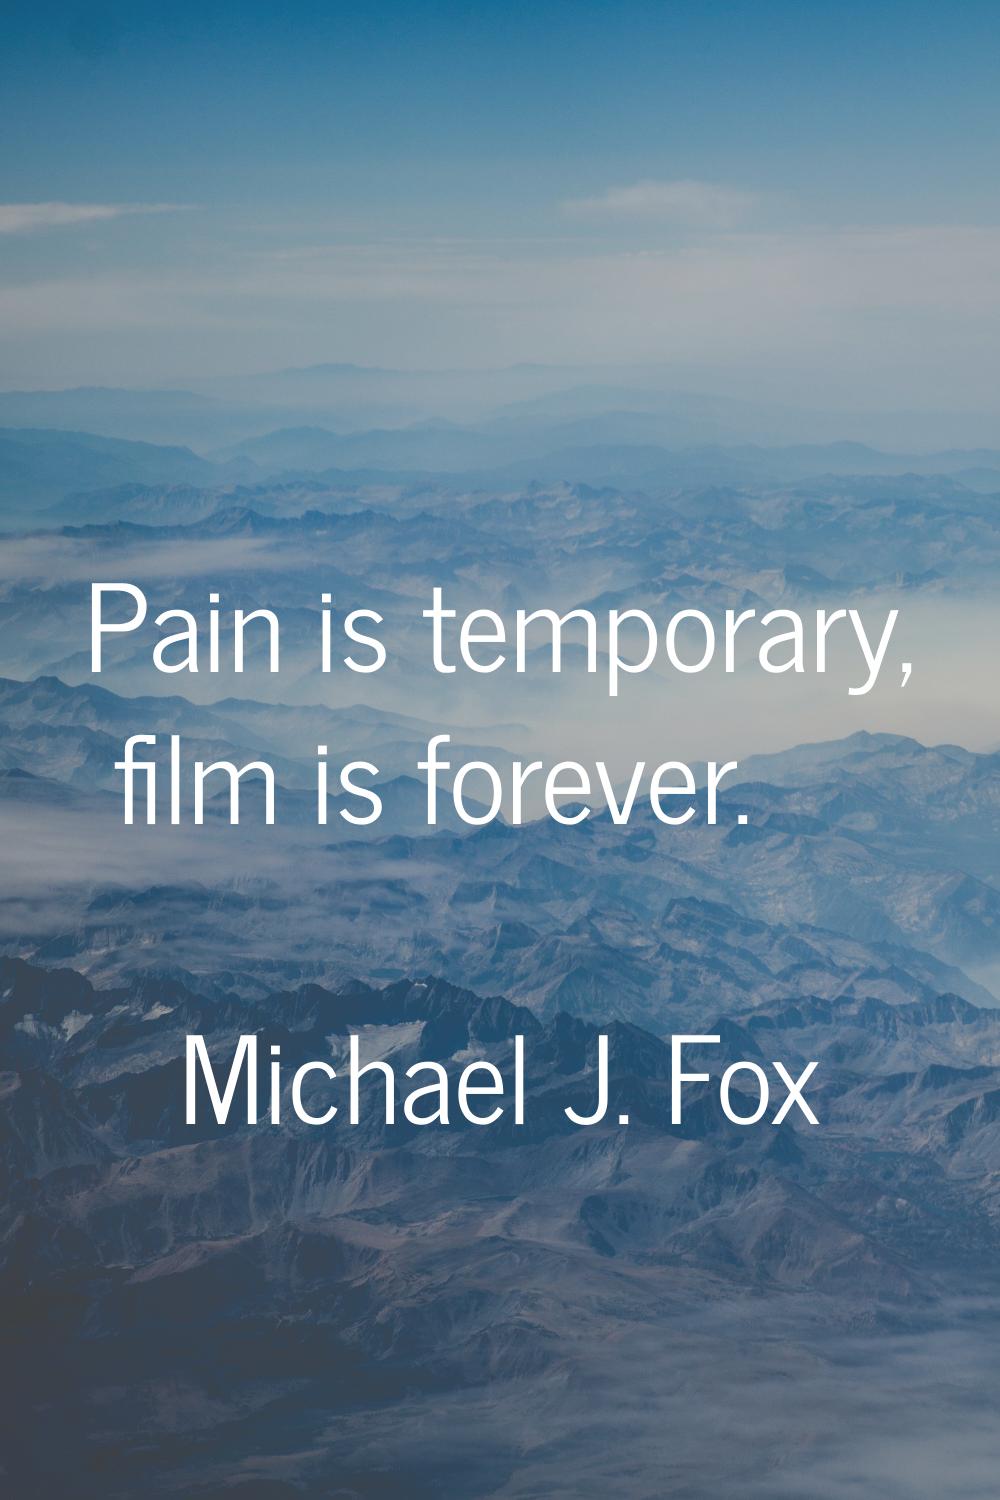 Pain is temporary, film is forever.